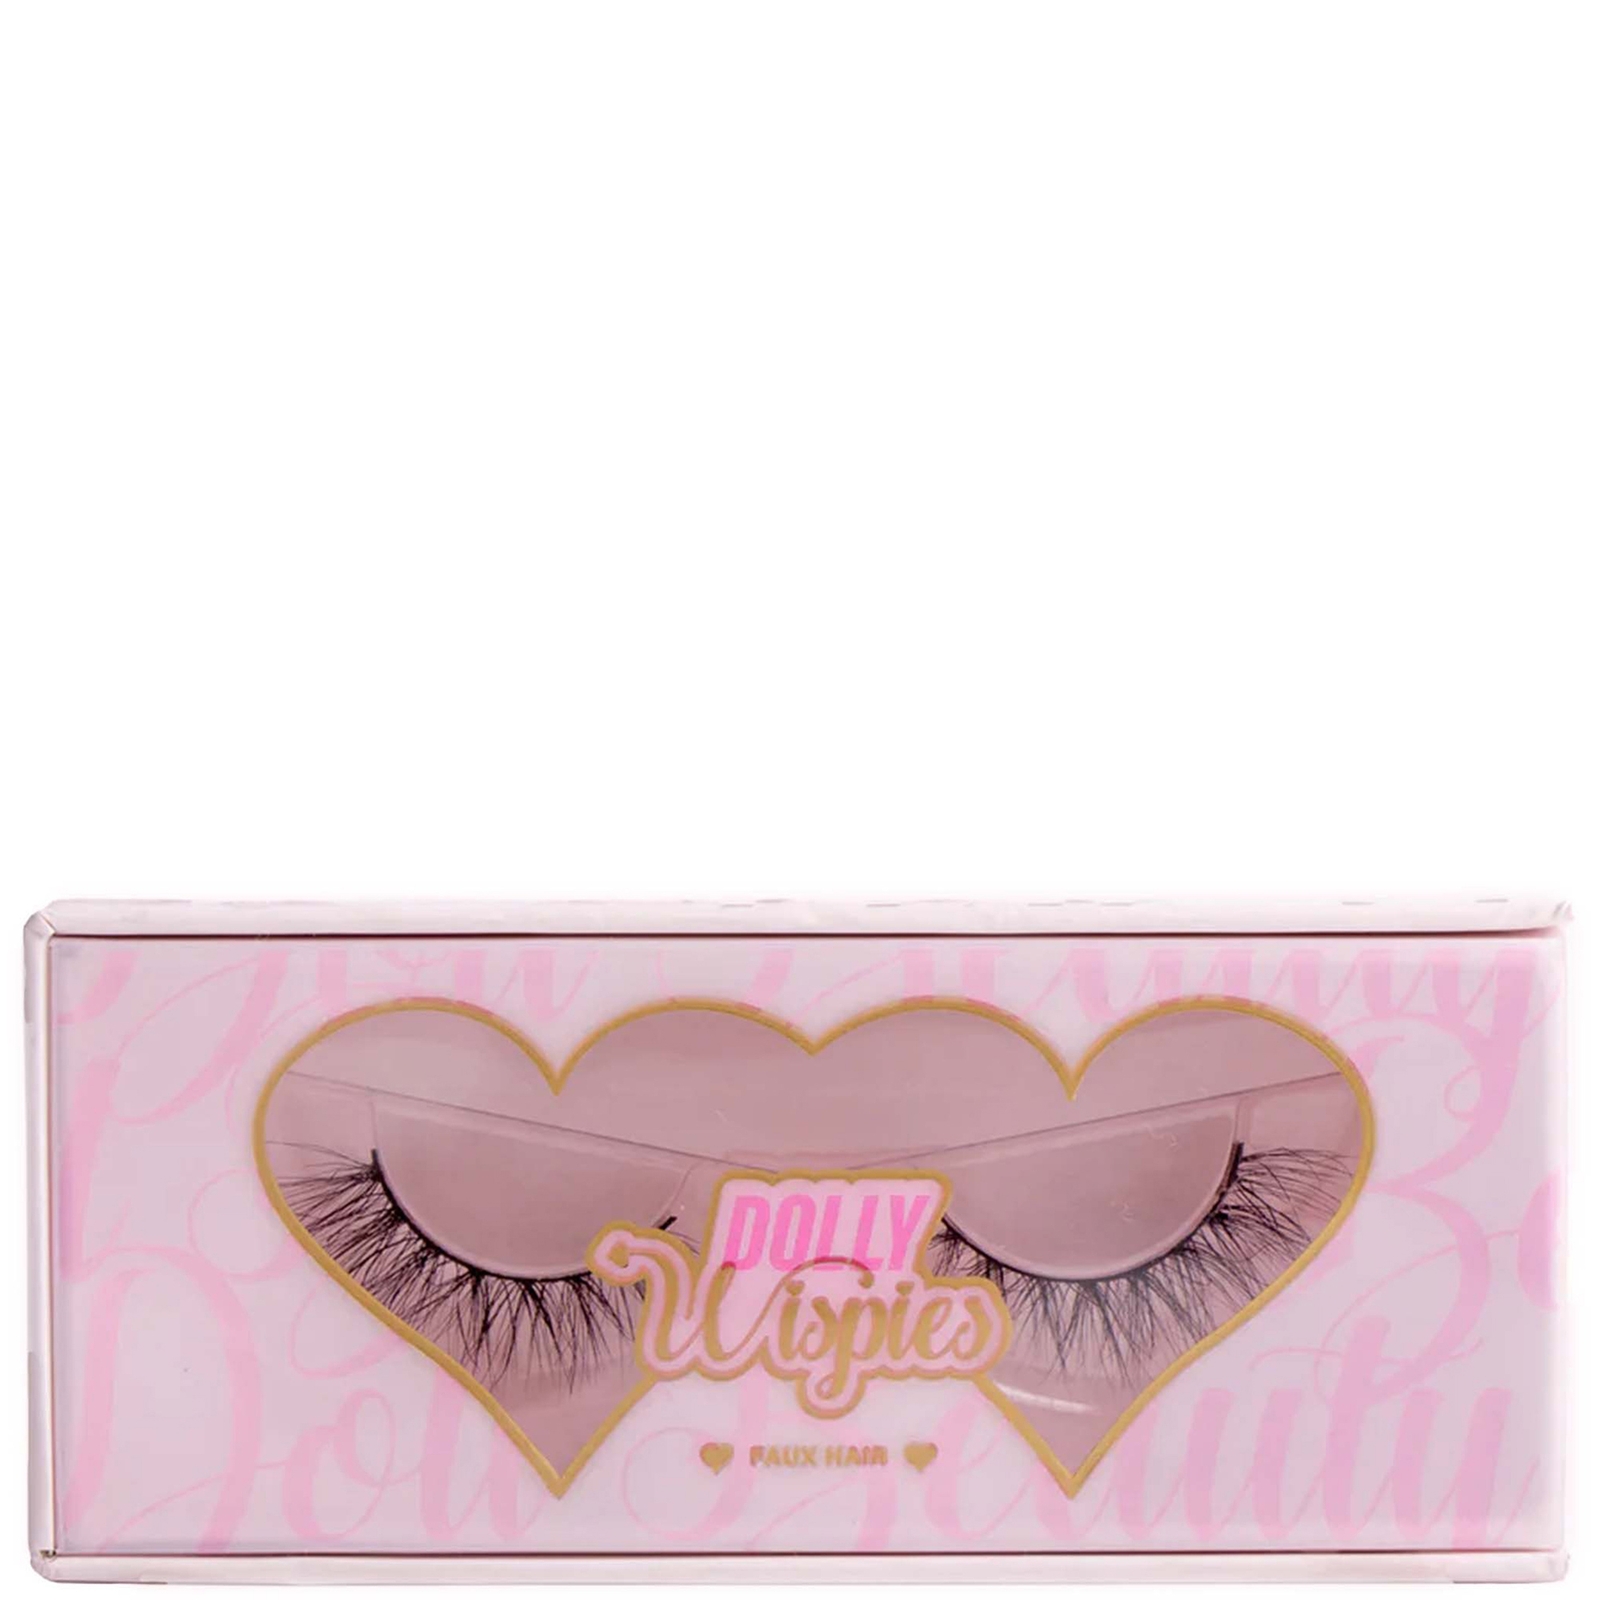 Doll Beauty Dolly Wispie Lashes In White